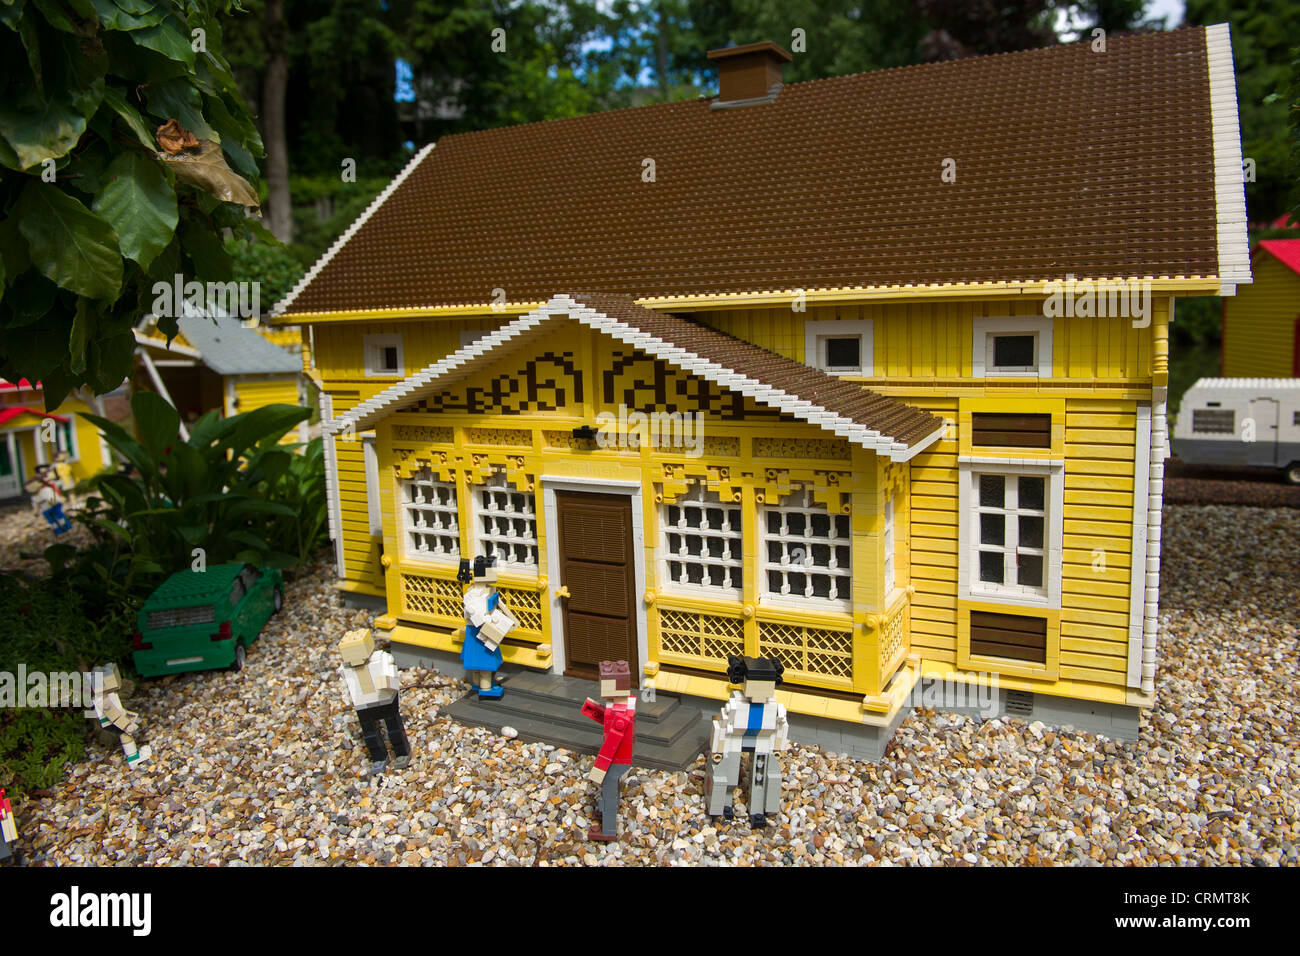 People in front of traditional yellow Lego house, Miniland, Legoland,  Billund, Denmark Stock Photo - Alamy